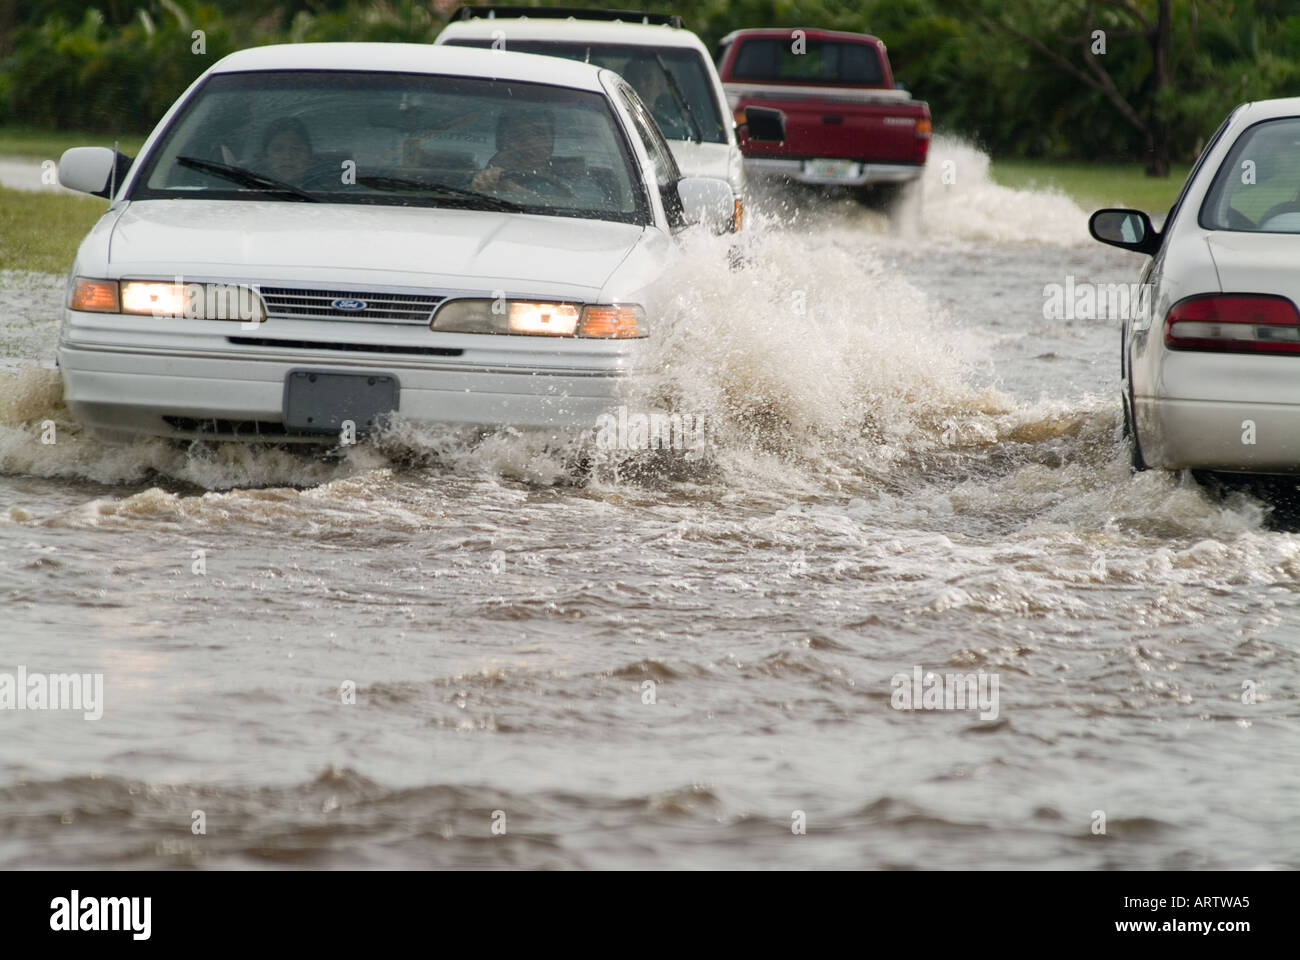 flooded road traffic cars in flood waters driving in flood conditions hazardous Stock Photo